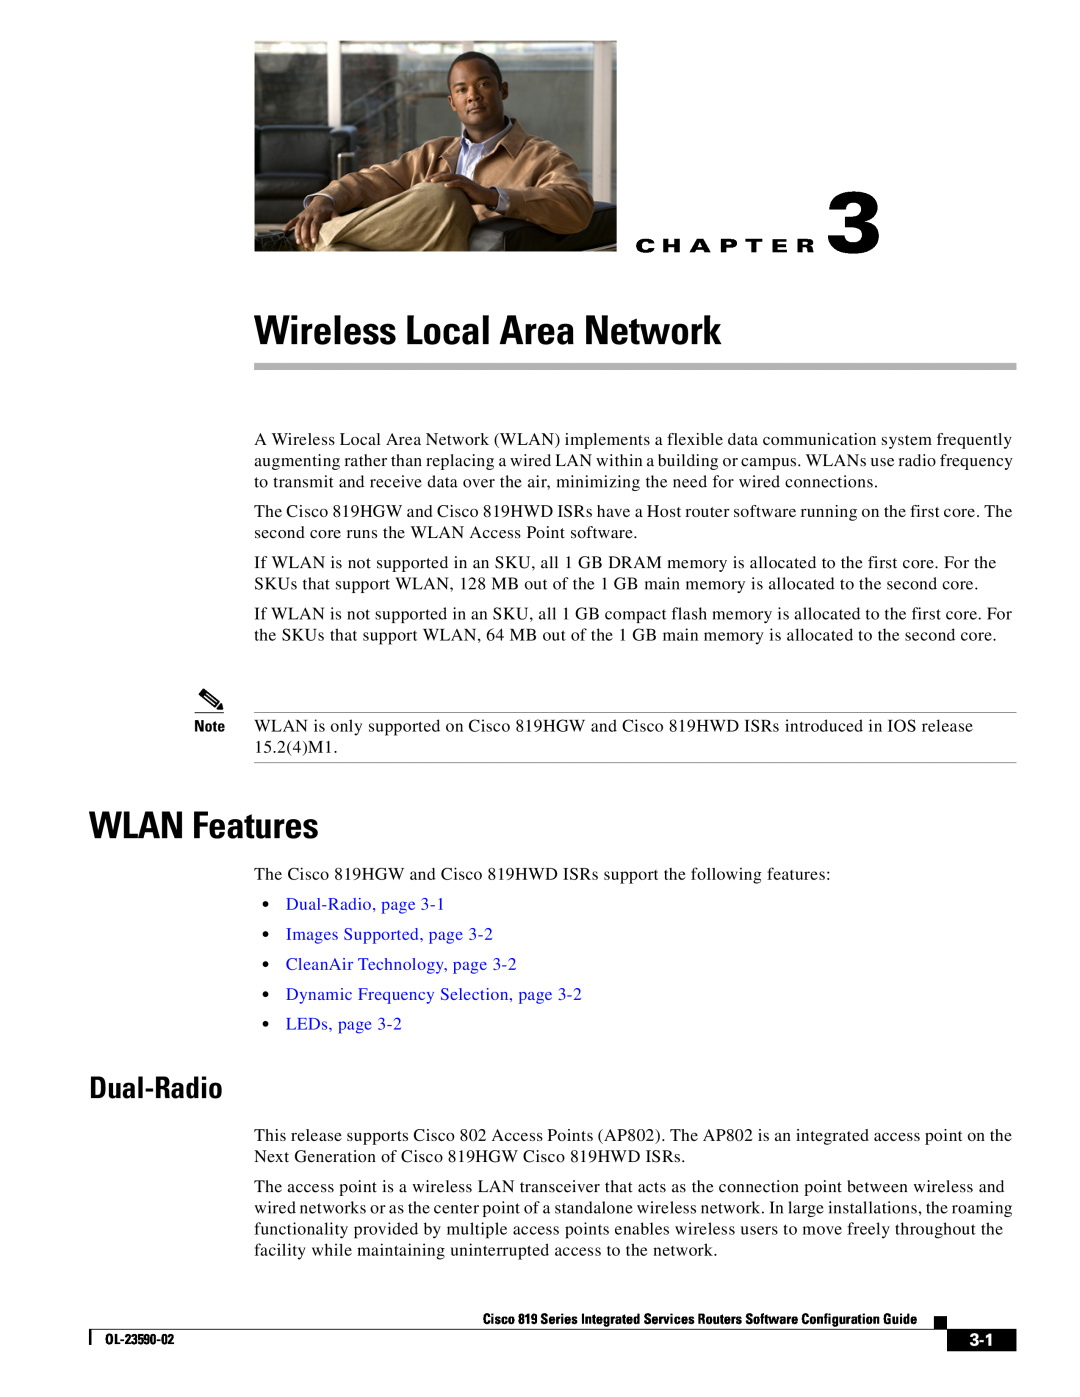 Cisco Systems C819HG4GVK9, C819GUK9 manual Wireless Local Area Network, WLAN Features, Dual-Radio, C H A P T E R 